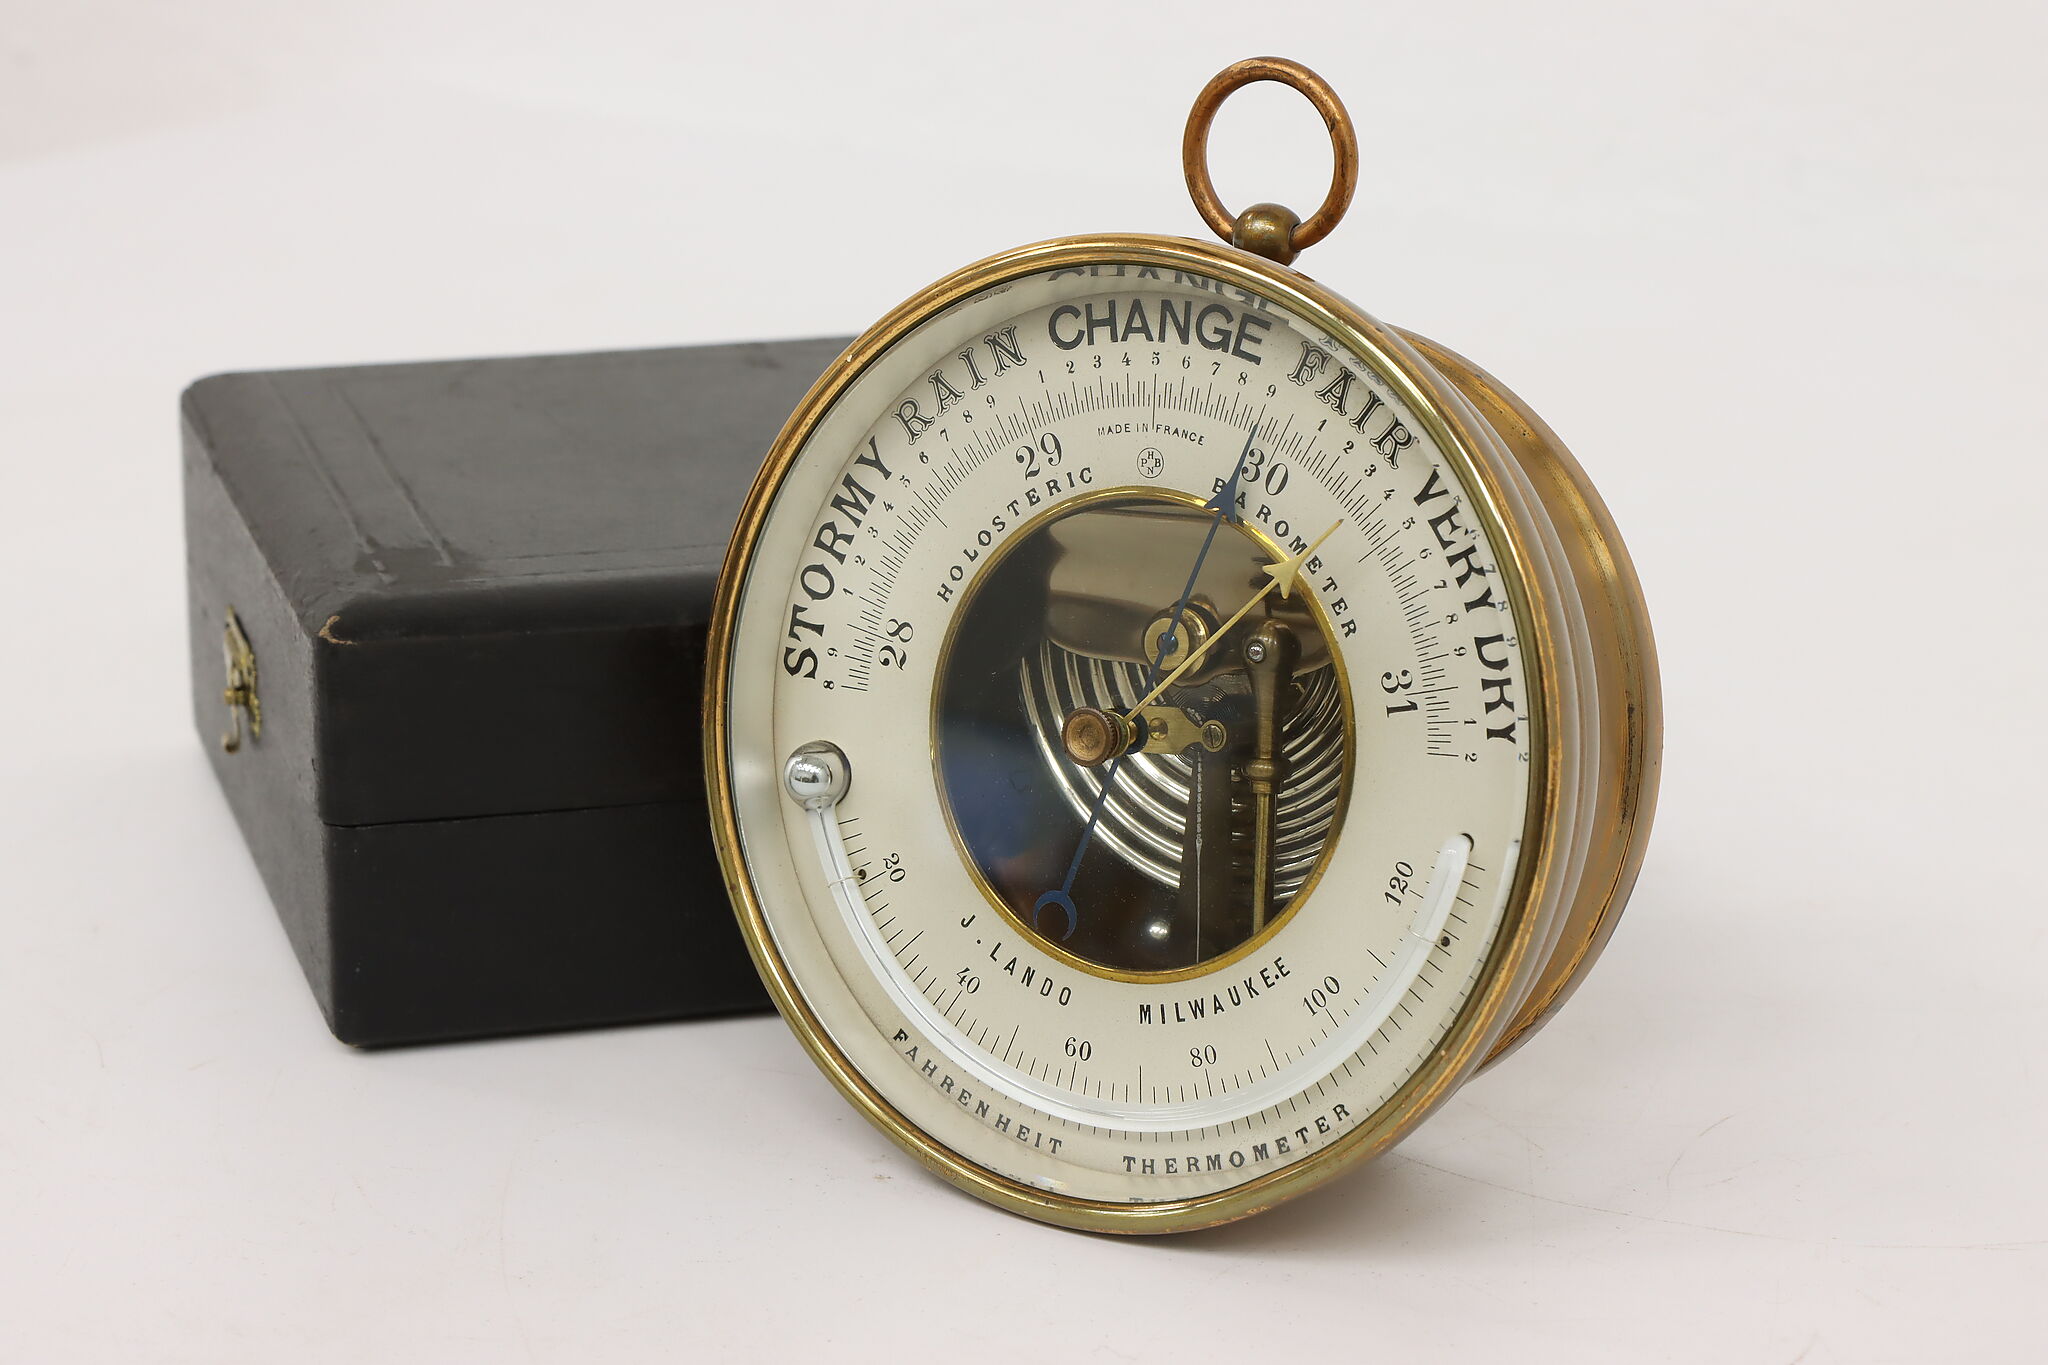 Sold at Auction: FRENCH BAROSTAR BAROMETER THERMOMETER HYGROMETER